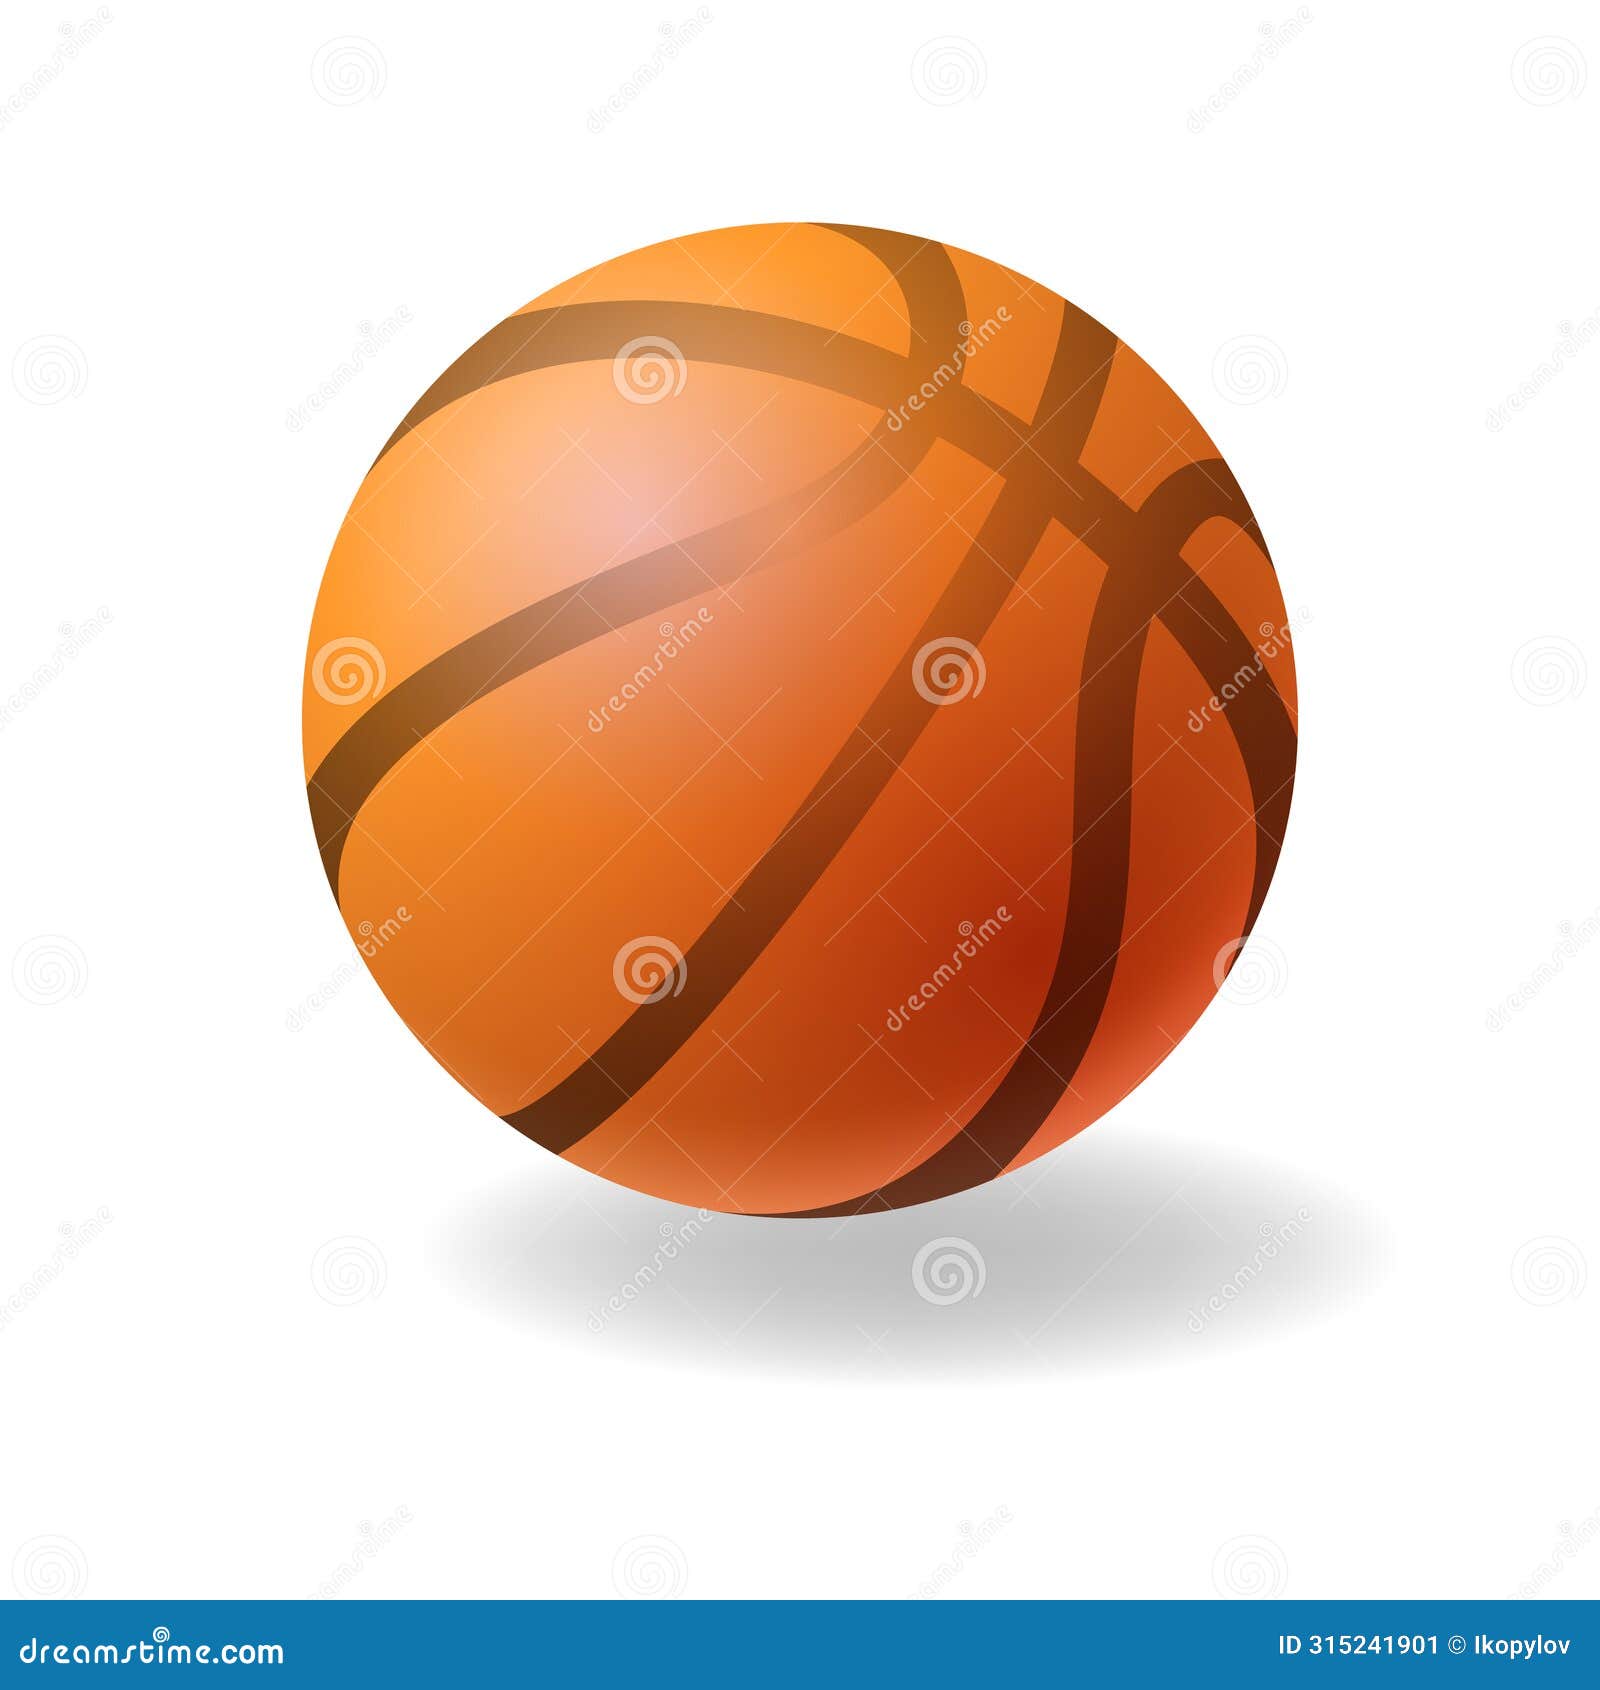 basketball ball mockup, on white background, sports accessory. orange colored sphere with black stripes. professional